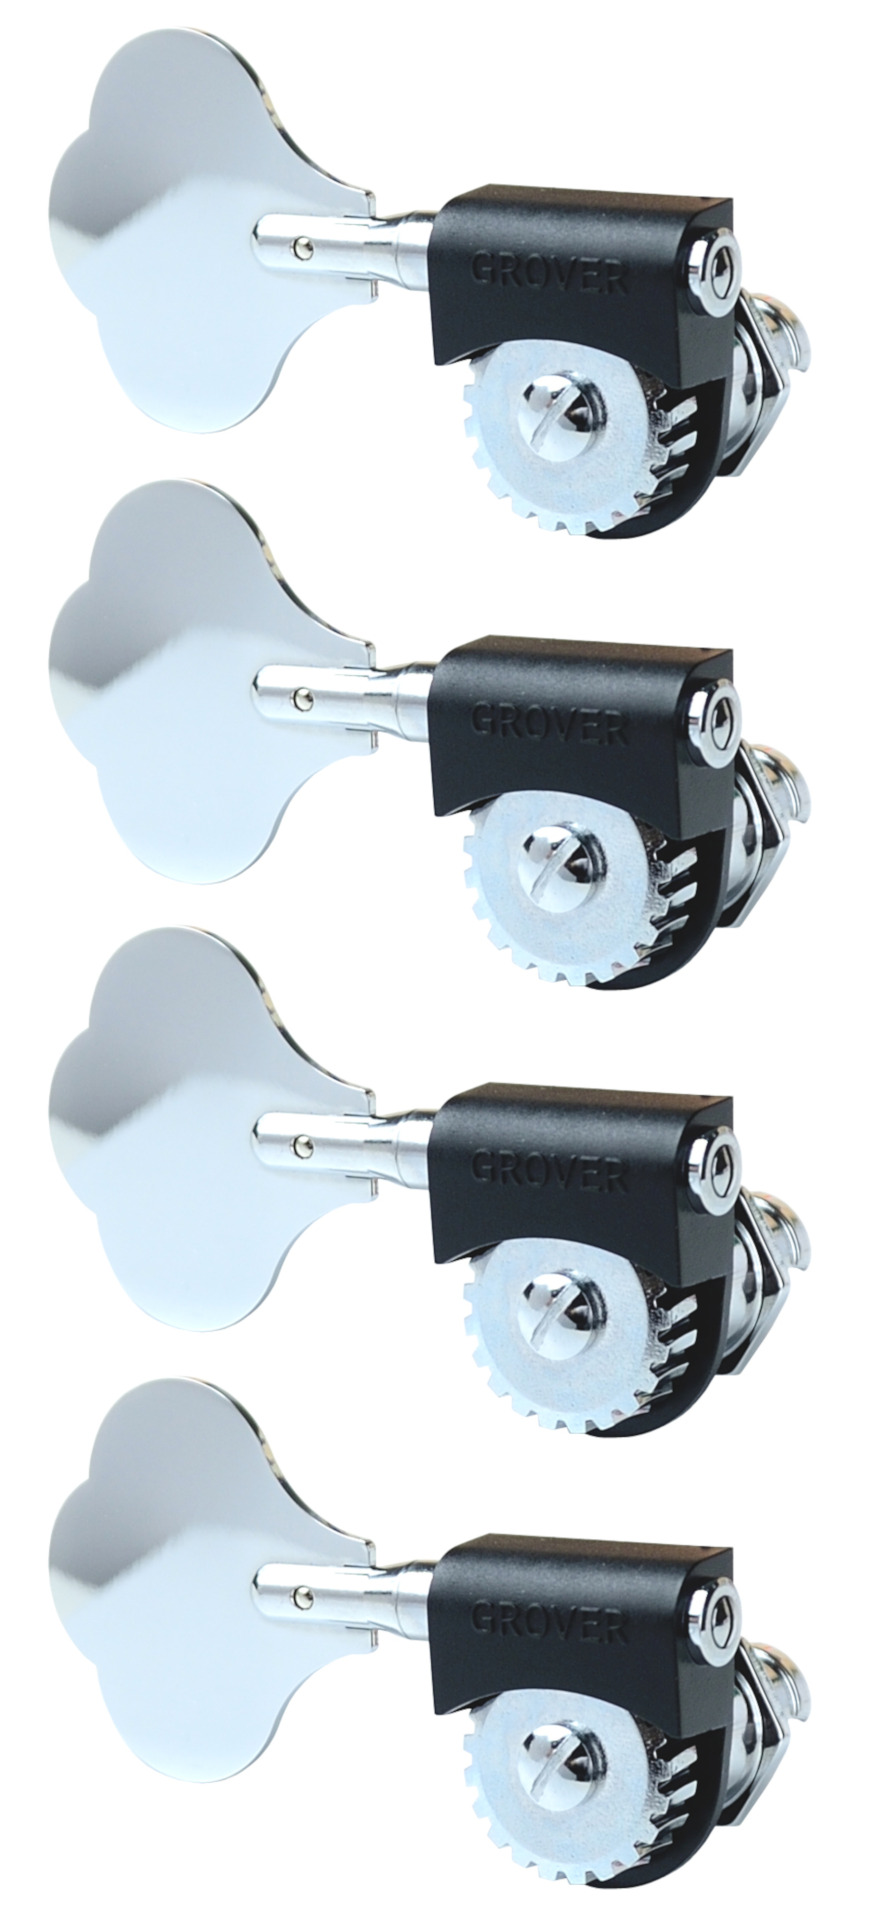 Grover 143CL4 Lightweight Bass Machines - Bass Machine Heads, 4-in-Line, Lefthand, Treble Side (Right) - Chrome